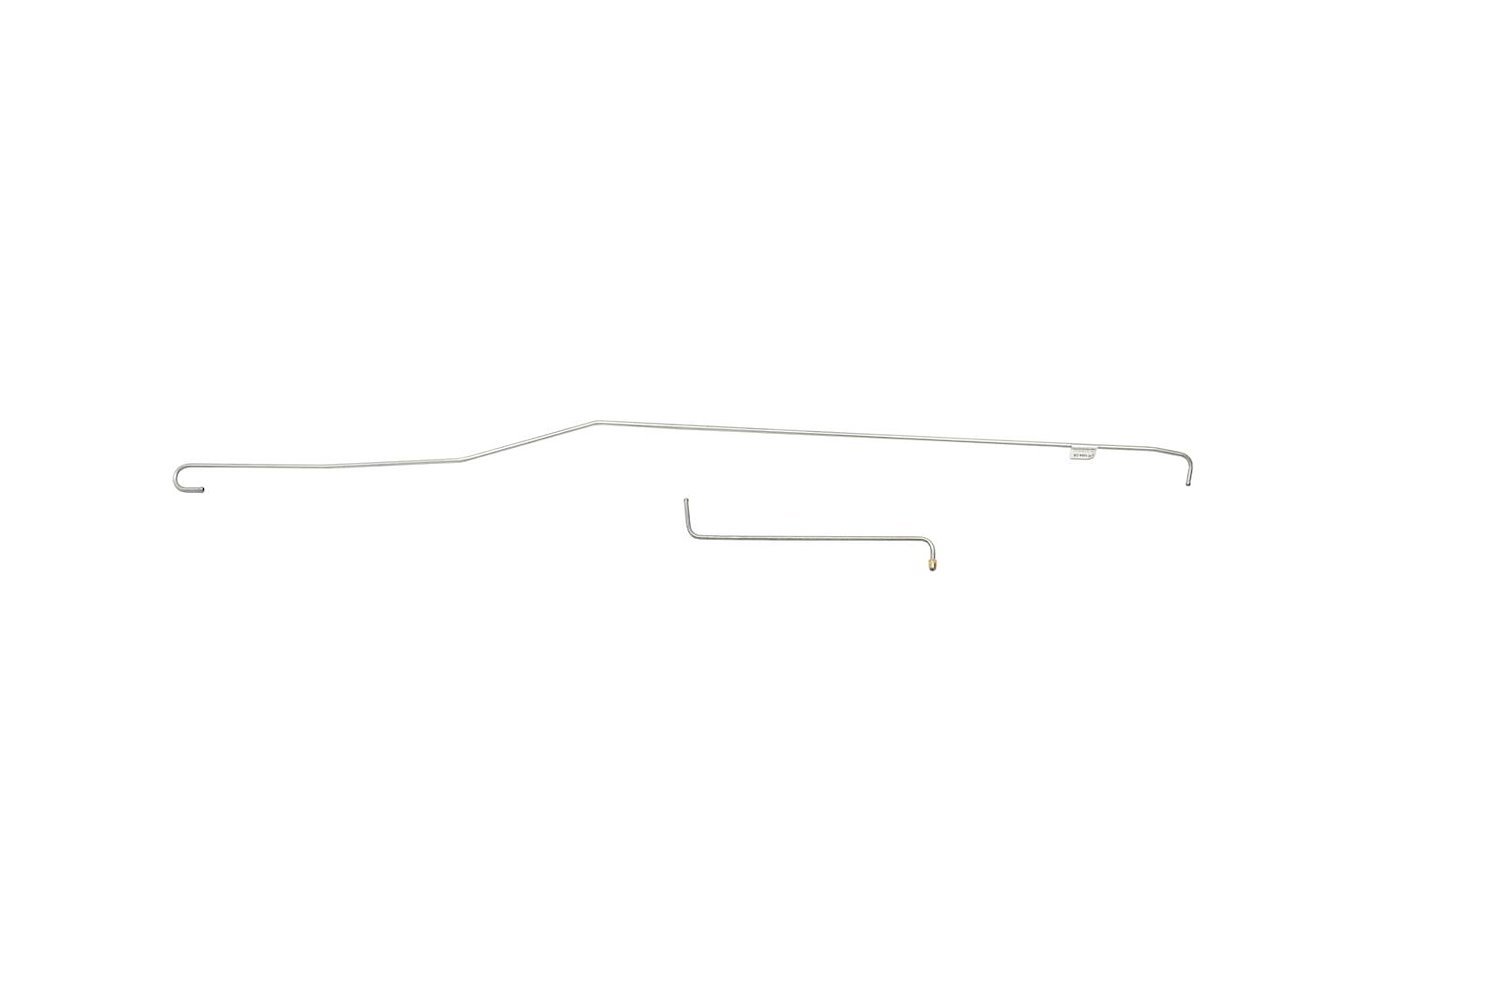 Chevy / GMC Pick Up Fuel Supply Line -1967 1968 1969 1970